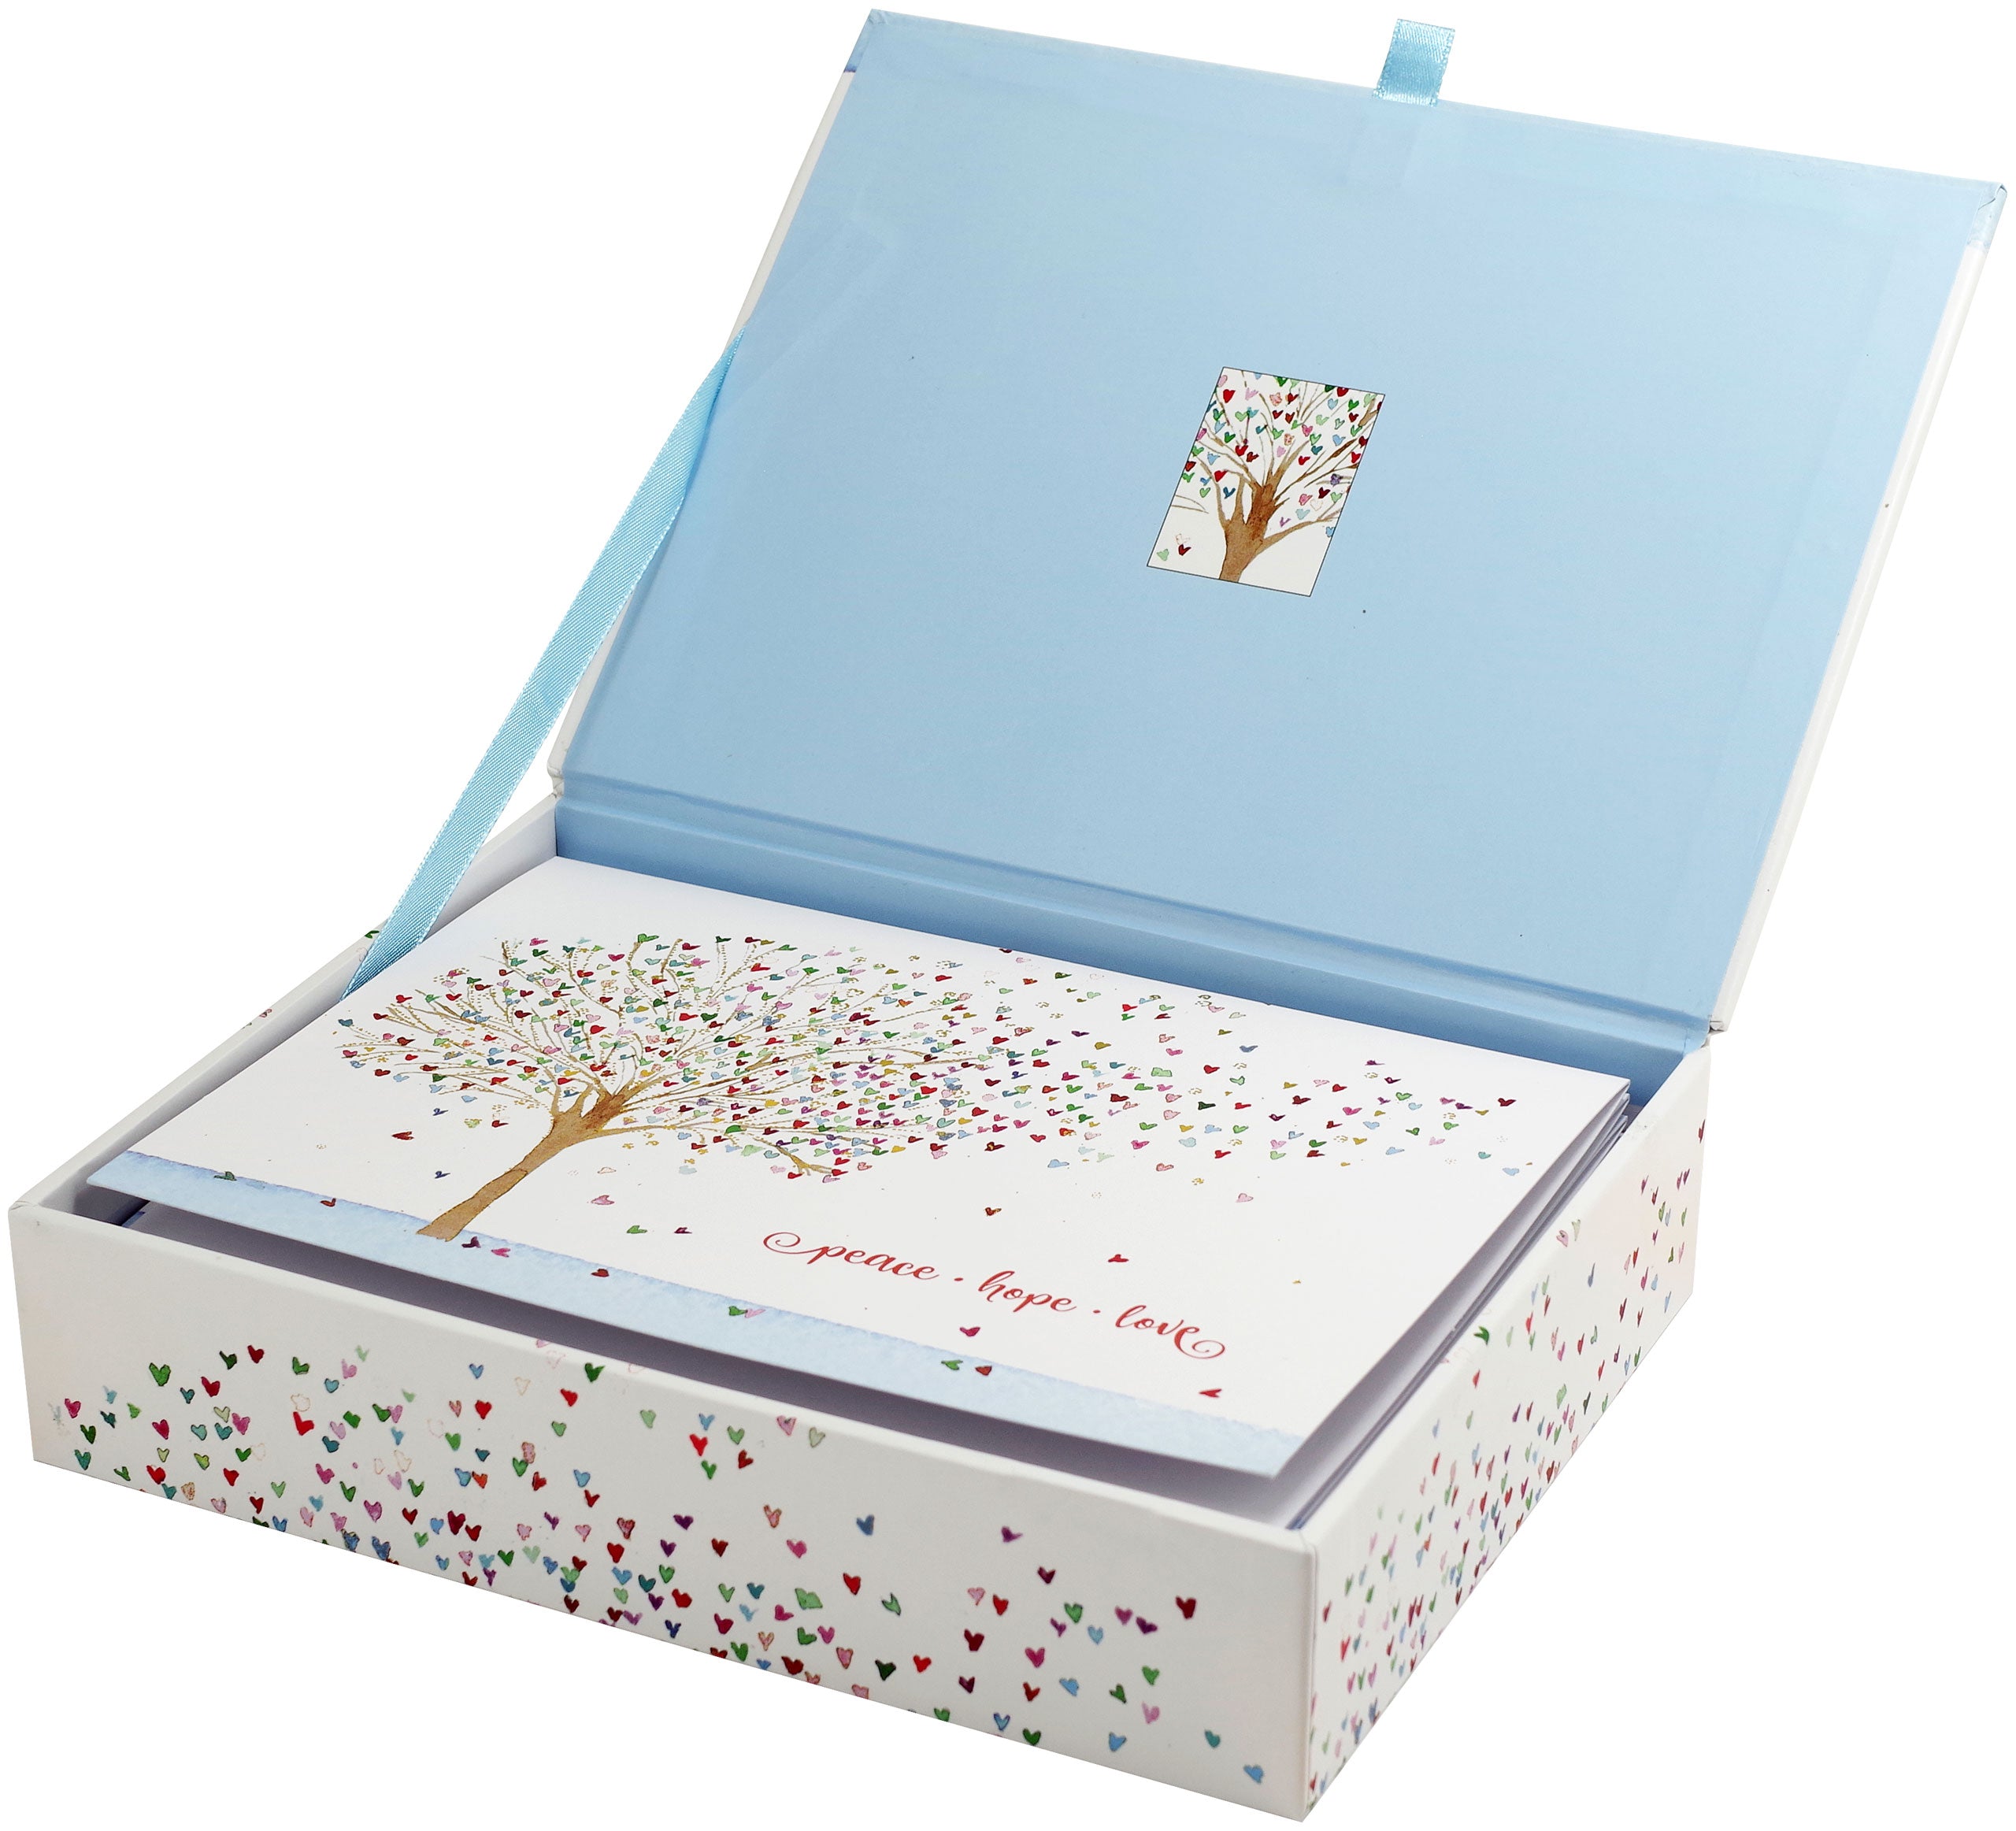 Deluxe Boxed Christmas Cards - Festive Tree Of Hearts    